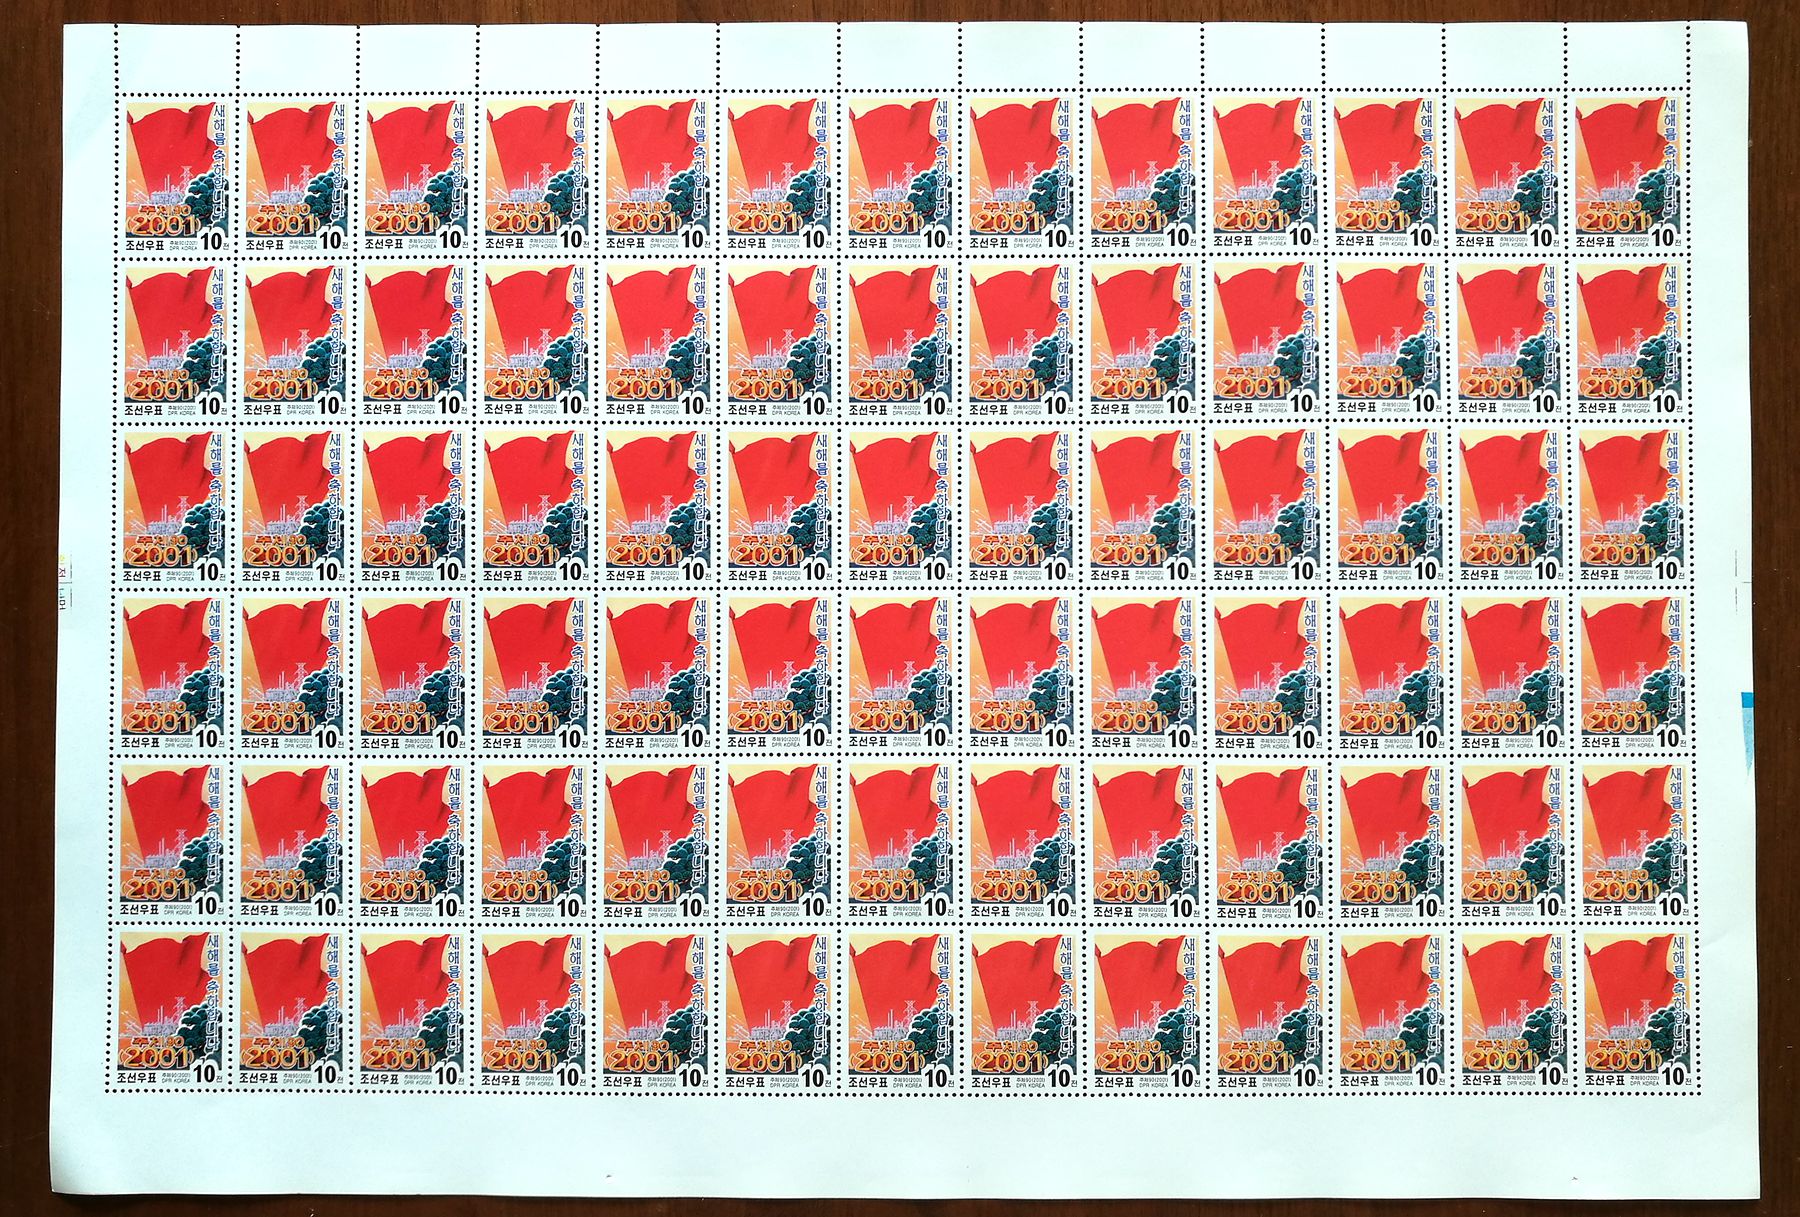 L4390, Korea 2001 New Year Stamp with Red Flag, Full Sheet of 65 Pcs Stamps - Click Image to Close